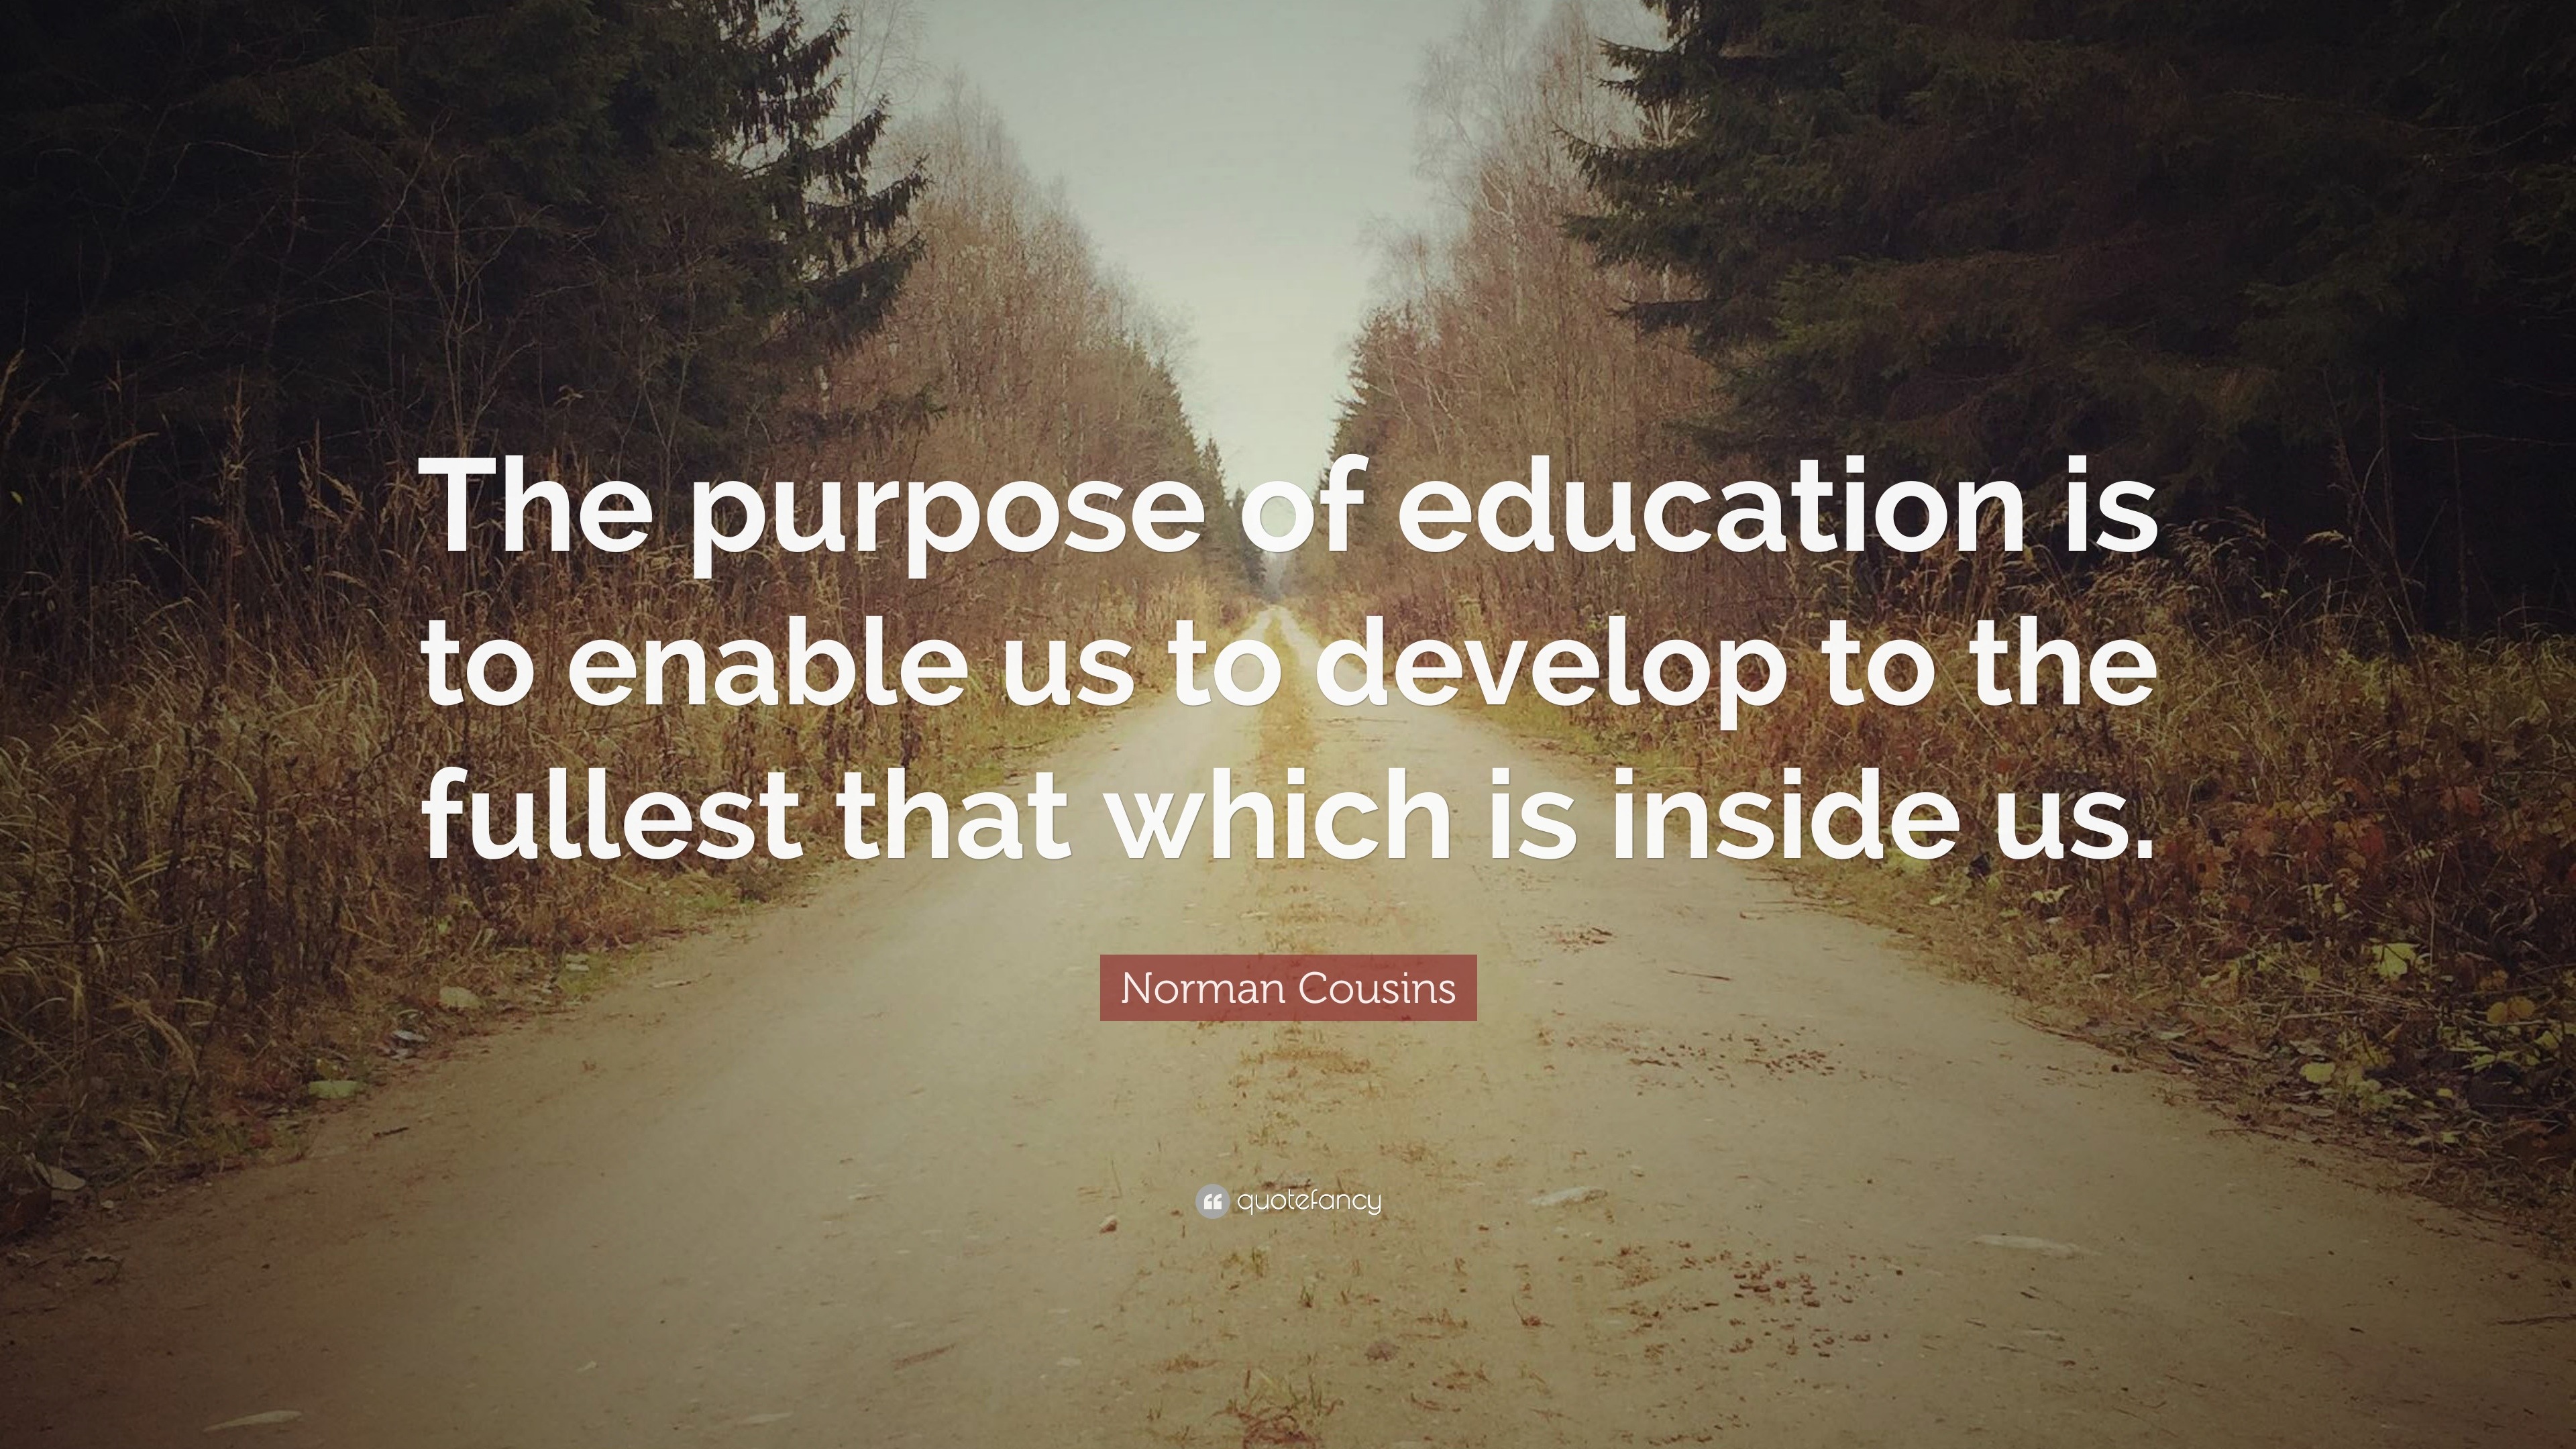 Norman Cousins Quote: “The purpose of education is to enable us to ...